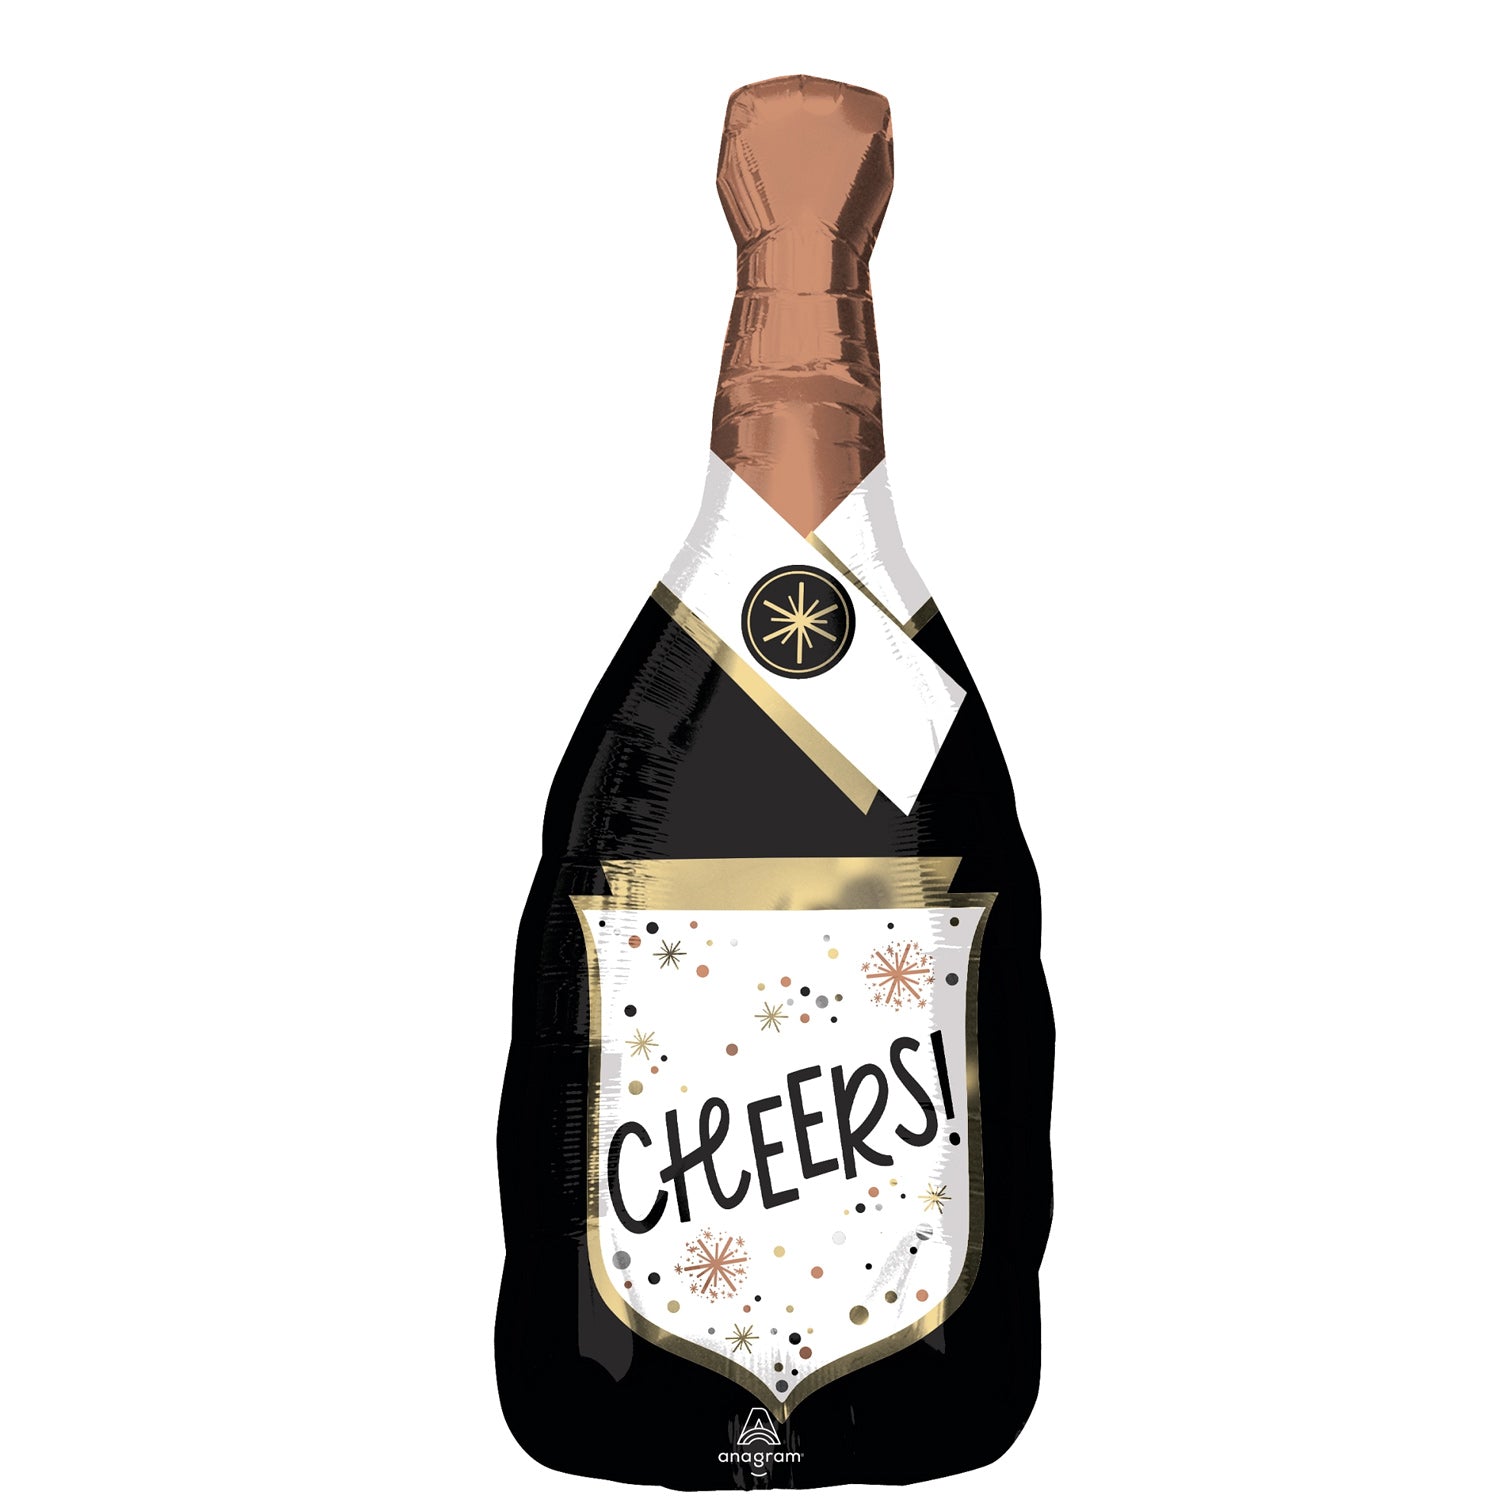 Cheers Confetti Bubbly Bottle Supershape Foil Baloons